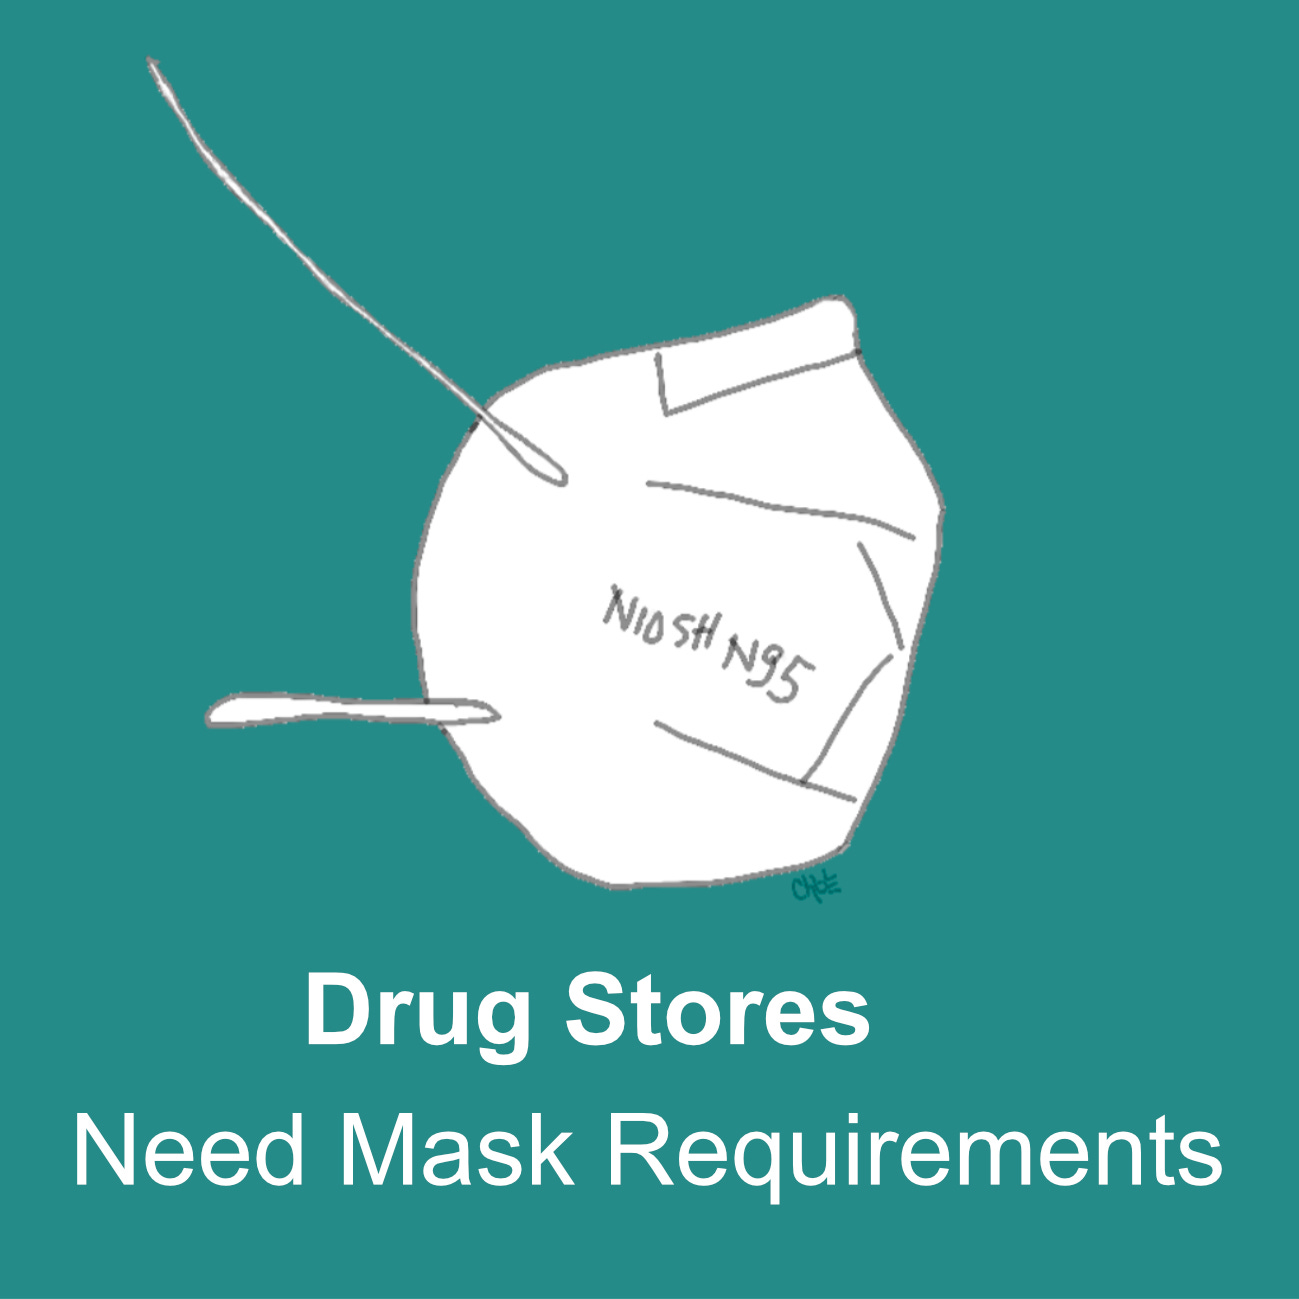 the picture is of a drawing of a fold flat style mask labeled NIOSH N95 and the caption reads drug stores need mask requirements